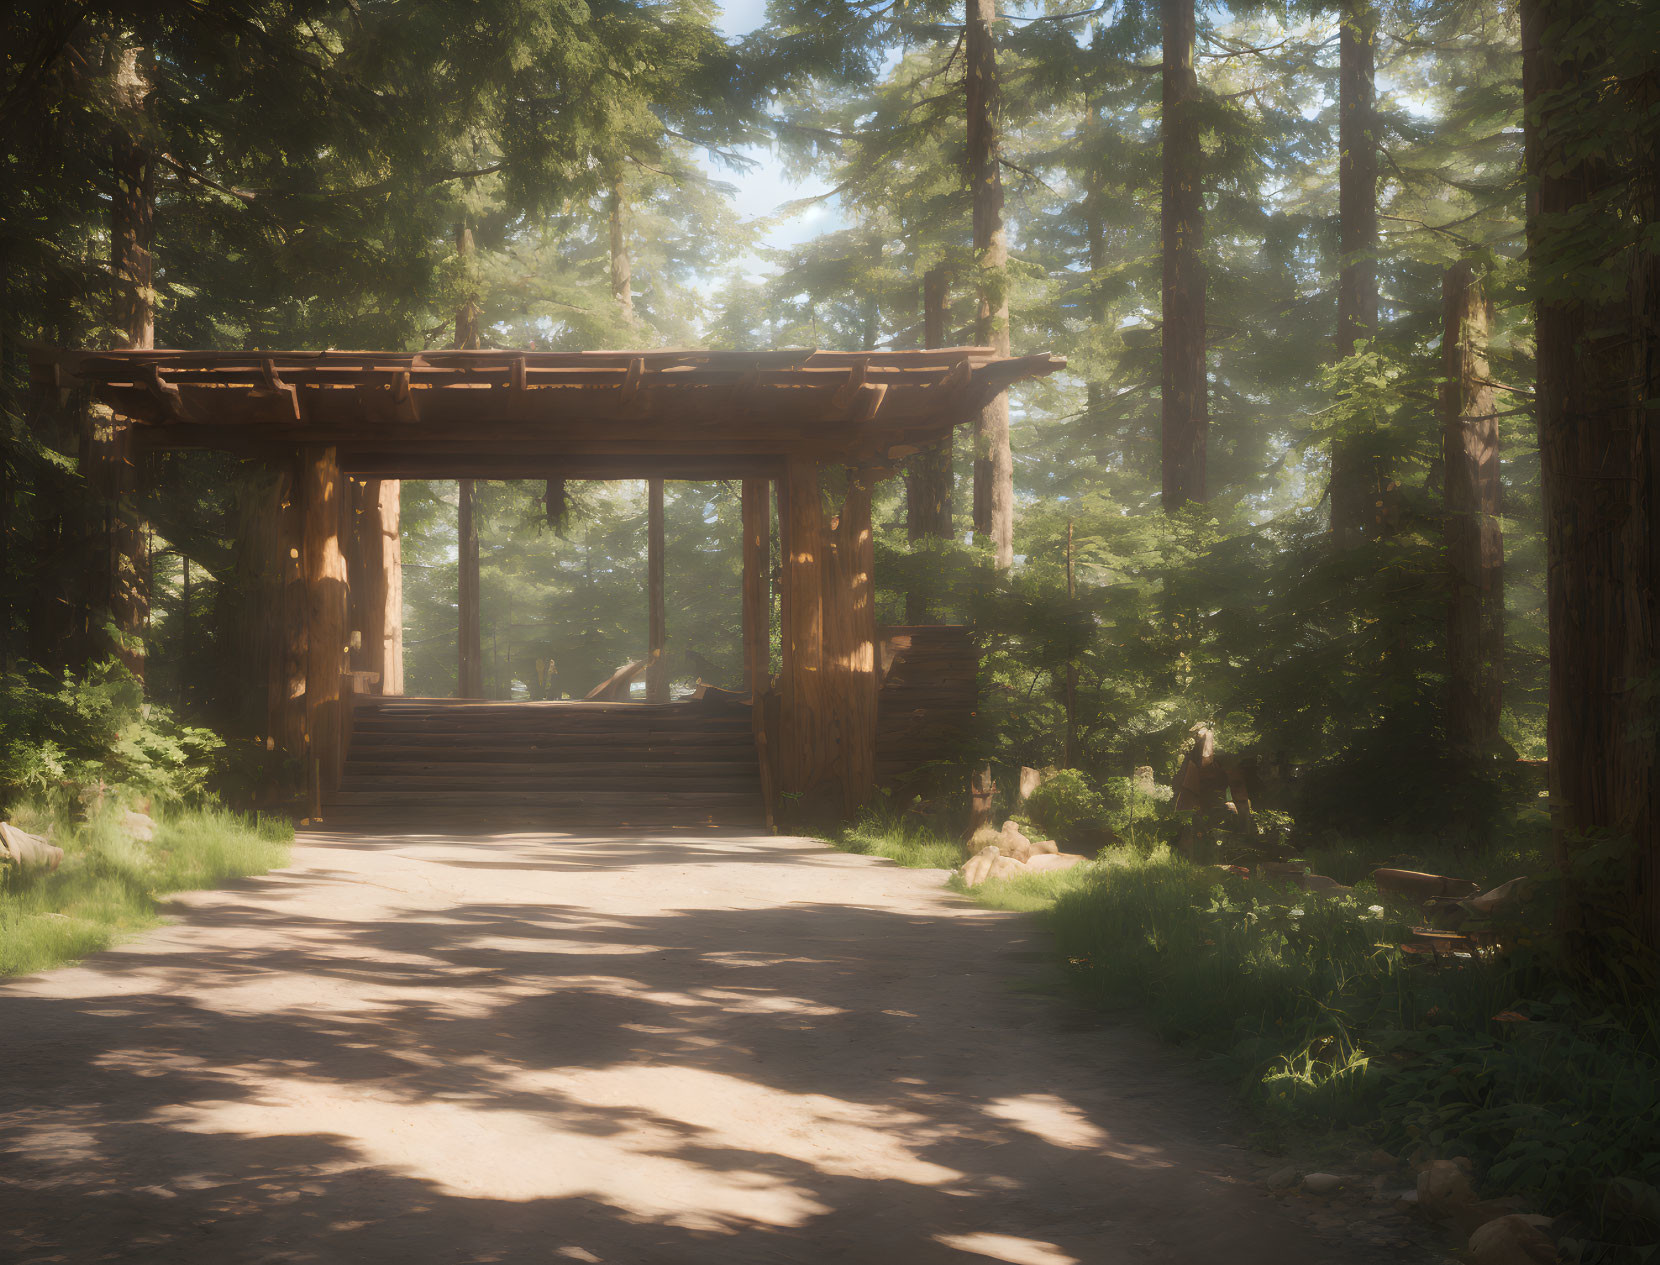 Tranquil Forest Path with Wooden Gate and Sunlight Filtering Through Trees